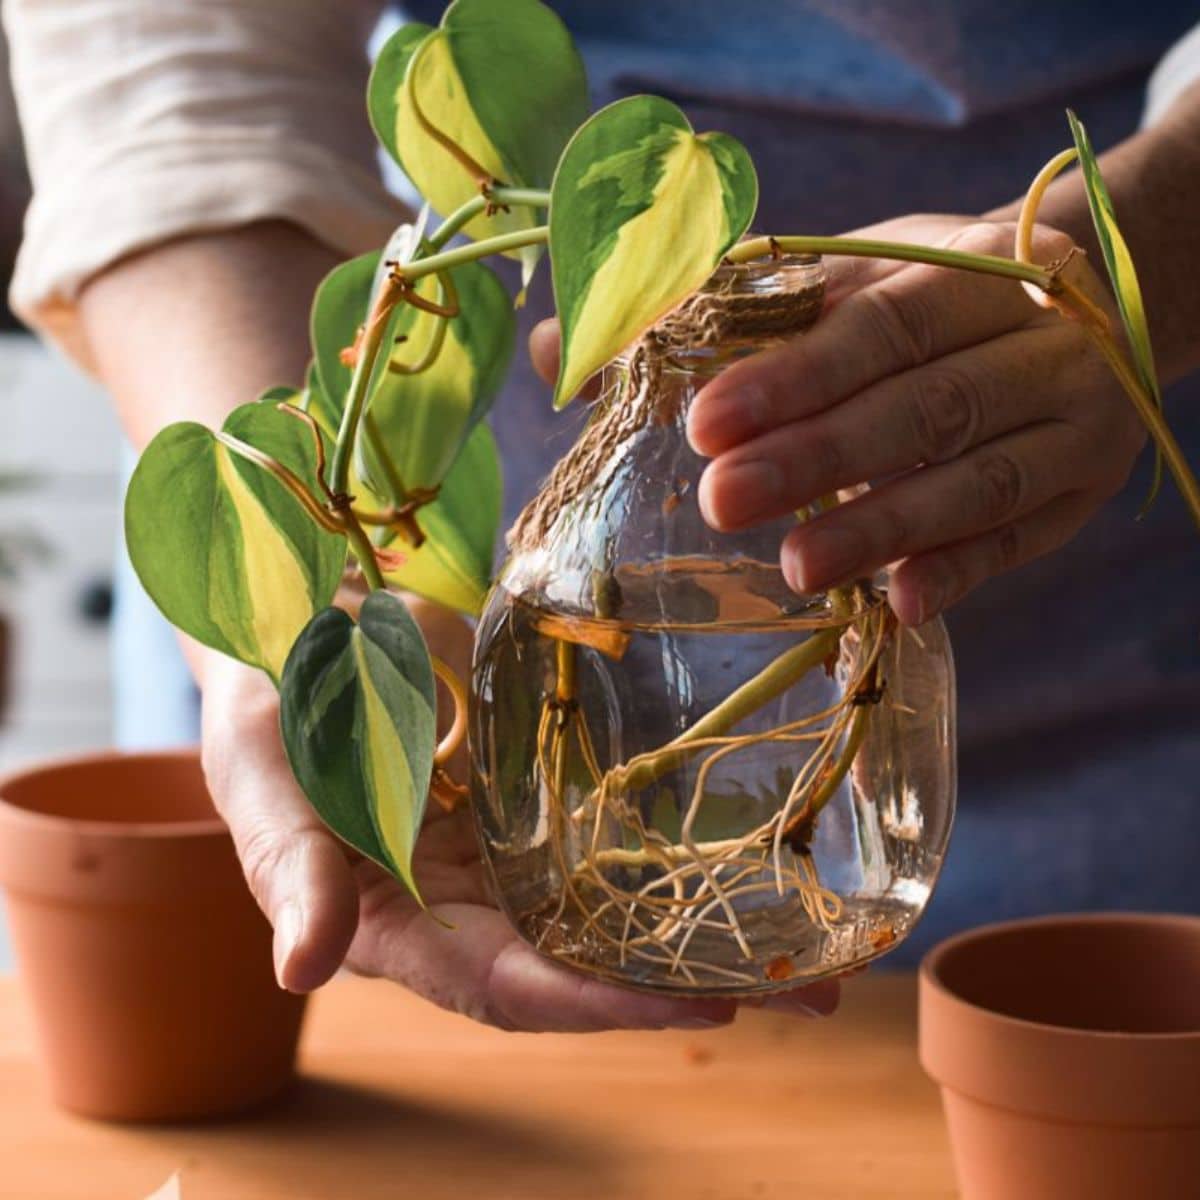 A woman holding a jar with pothos plant cuttings with roots.